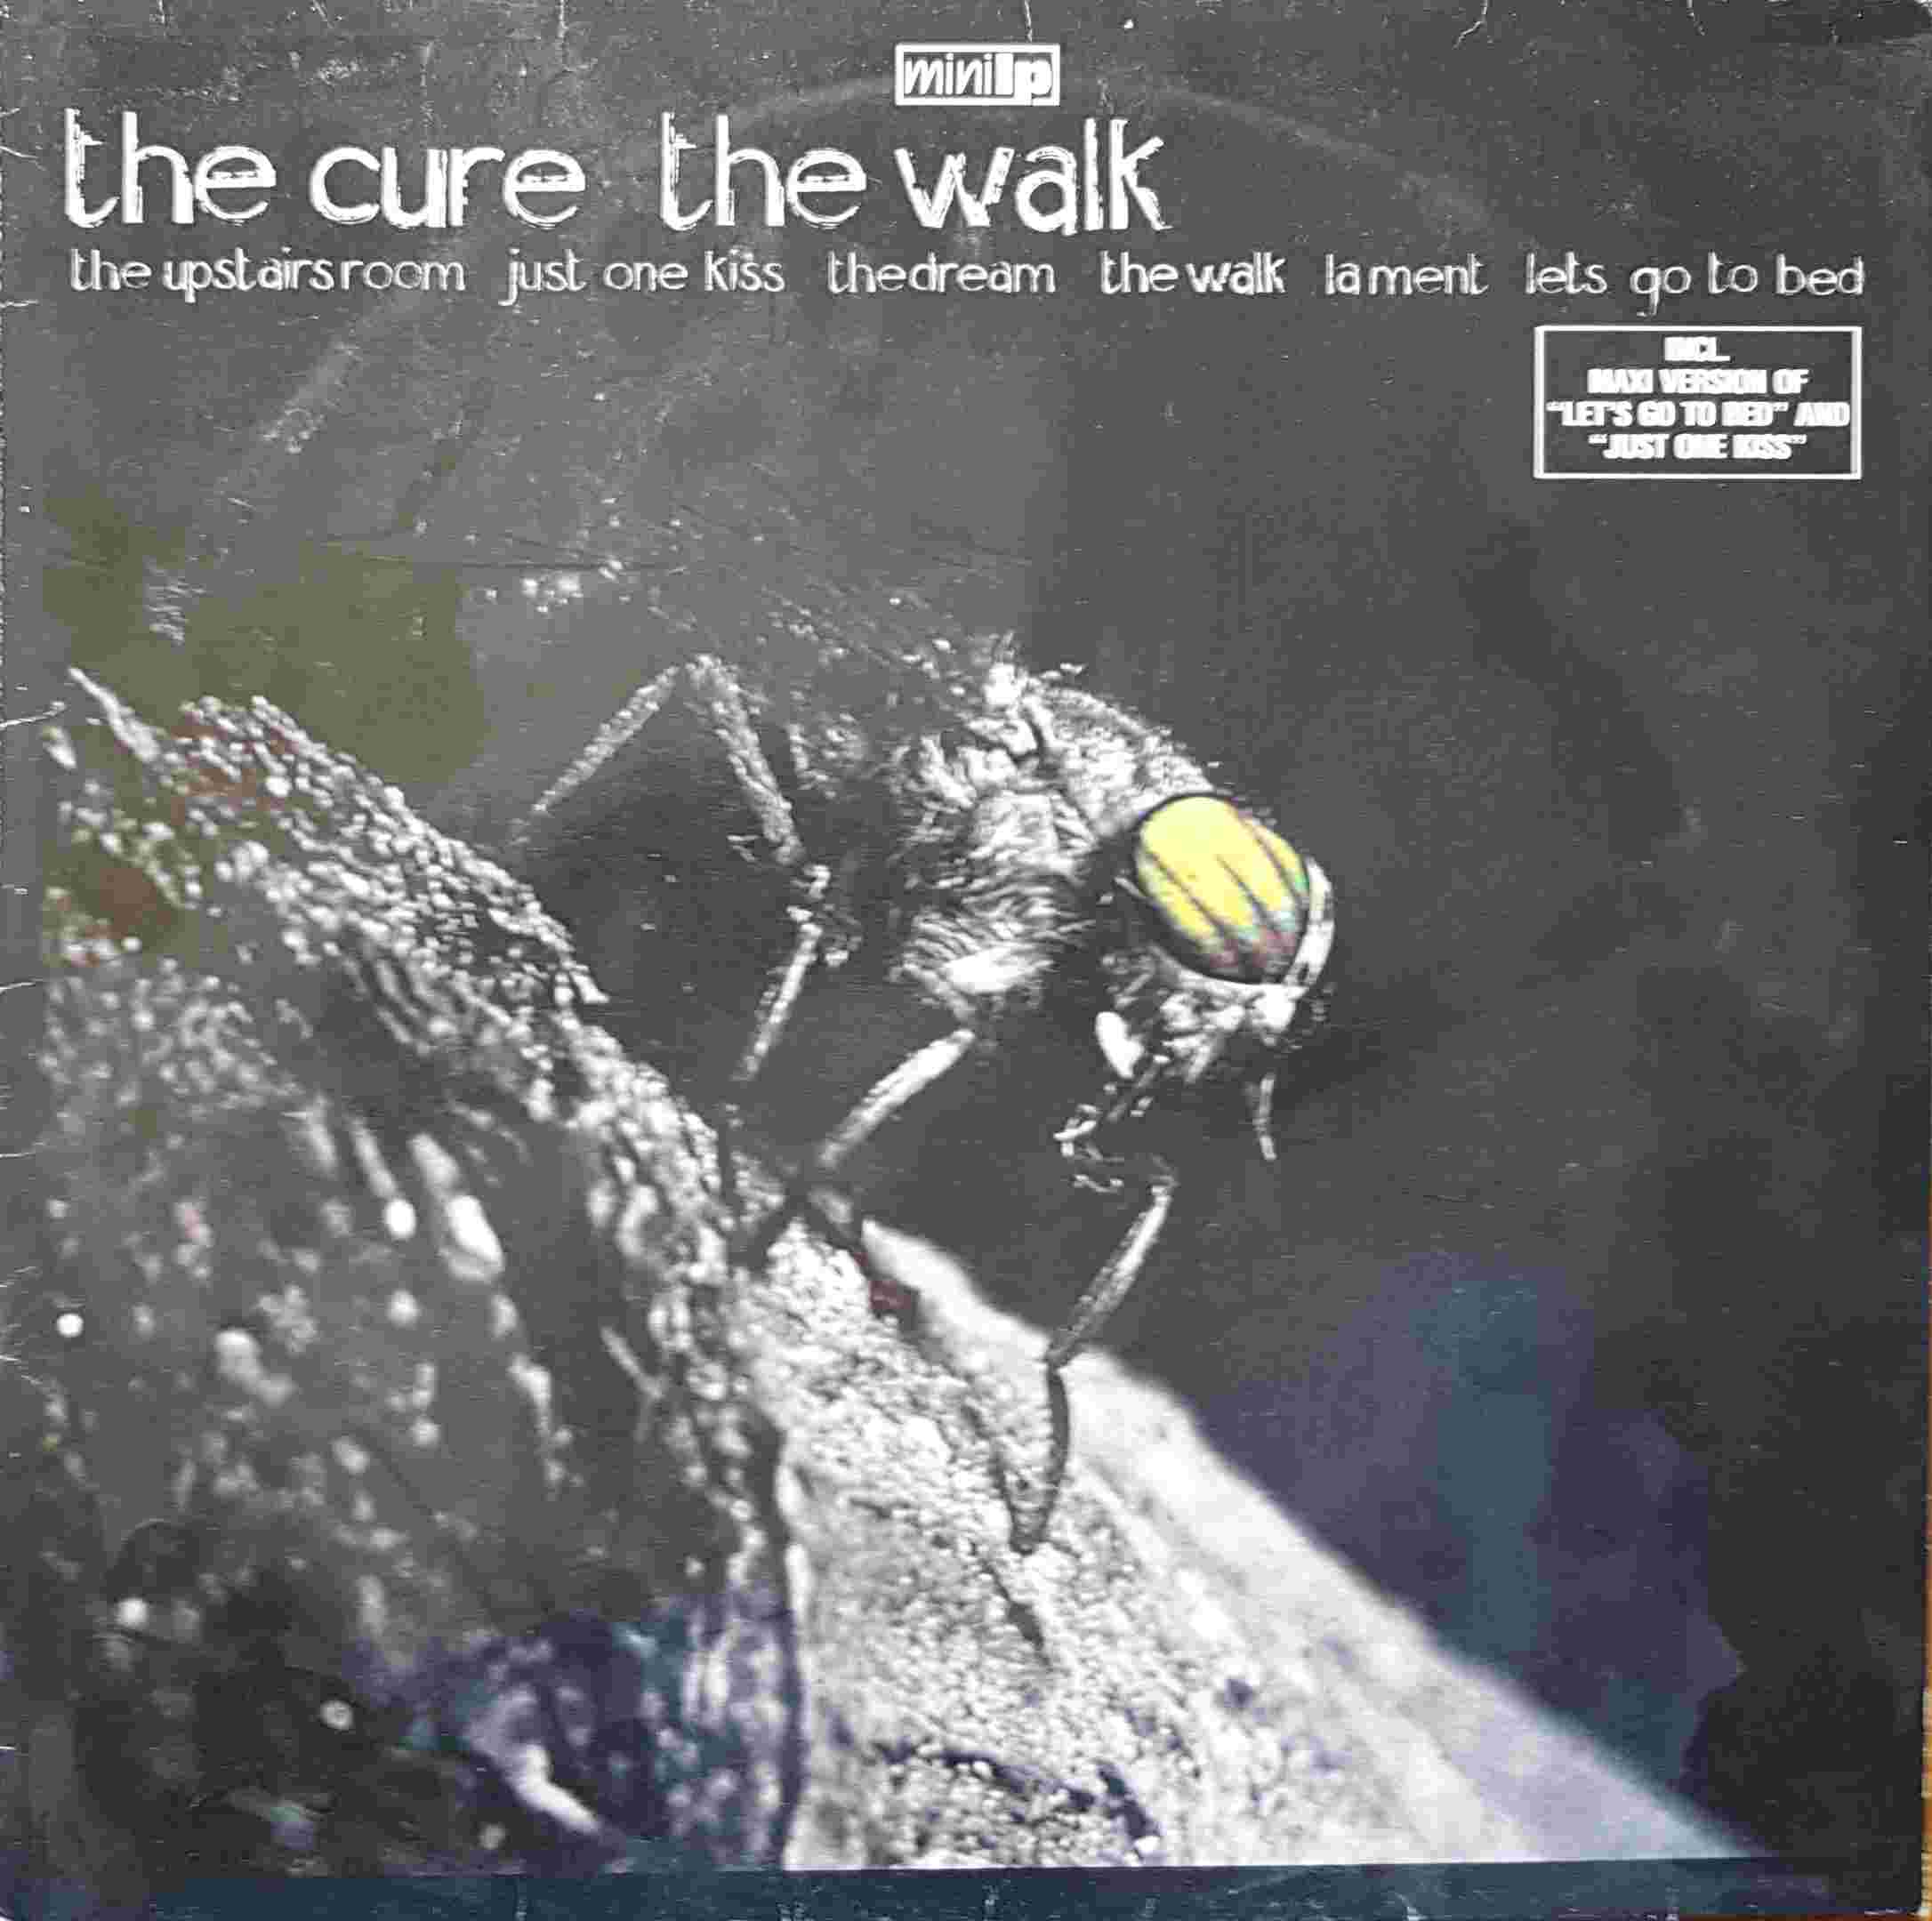 Picture of FICS 18 The walk by artist The Cure